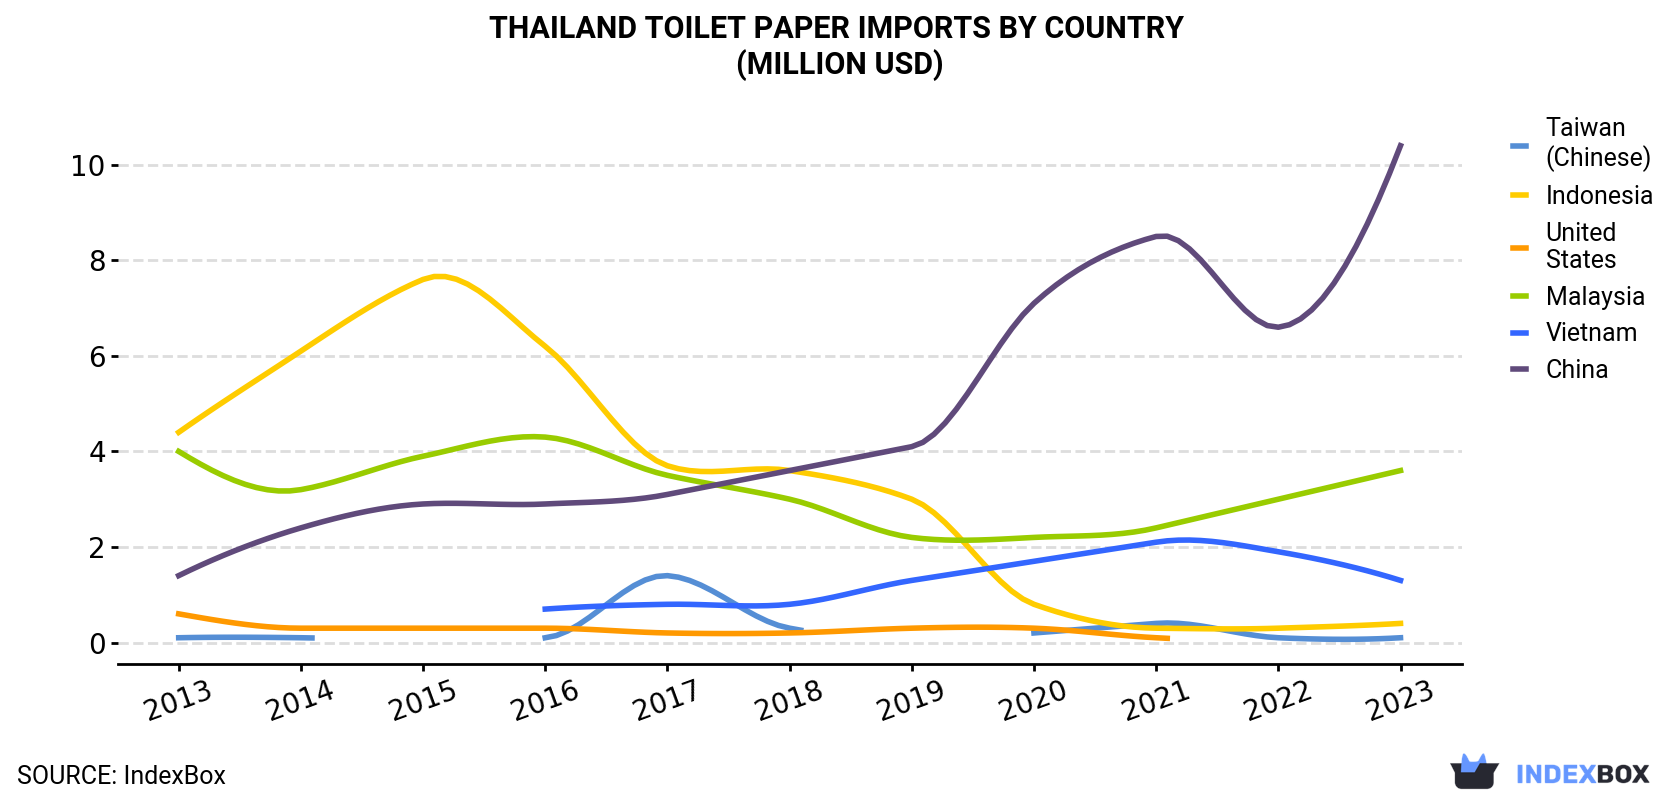 Thailand Toilet Paper Imports By Country (Million USD)